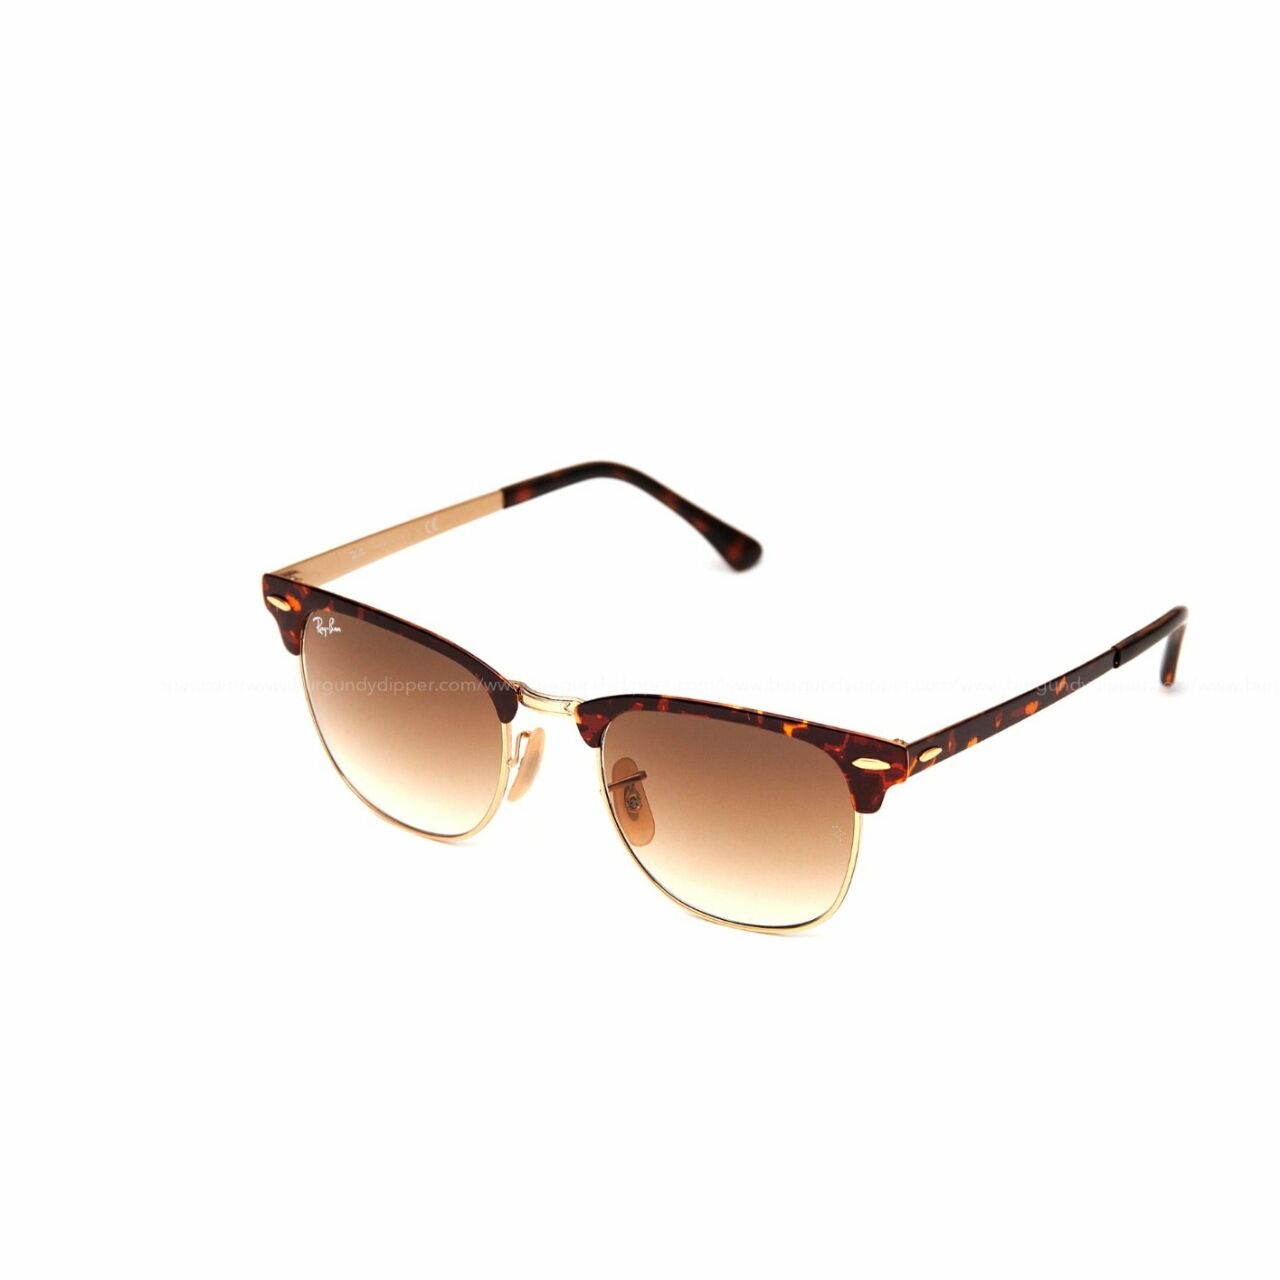 Ray-ban Clubmaster Metal Havana On Arista Clear Gradient Brown Sunglasses